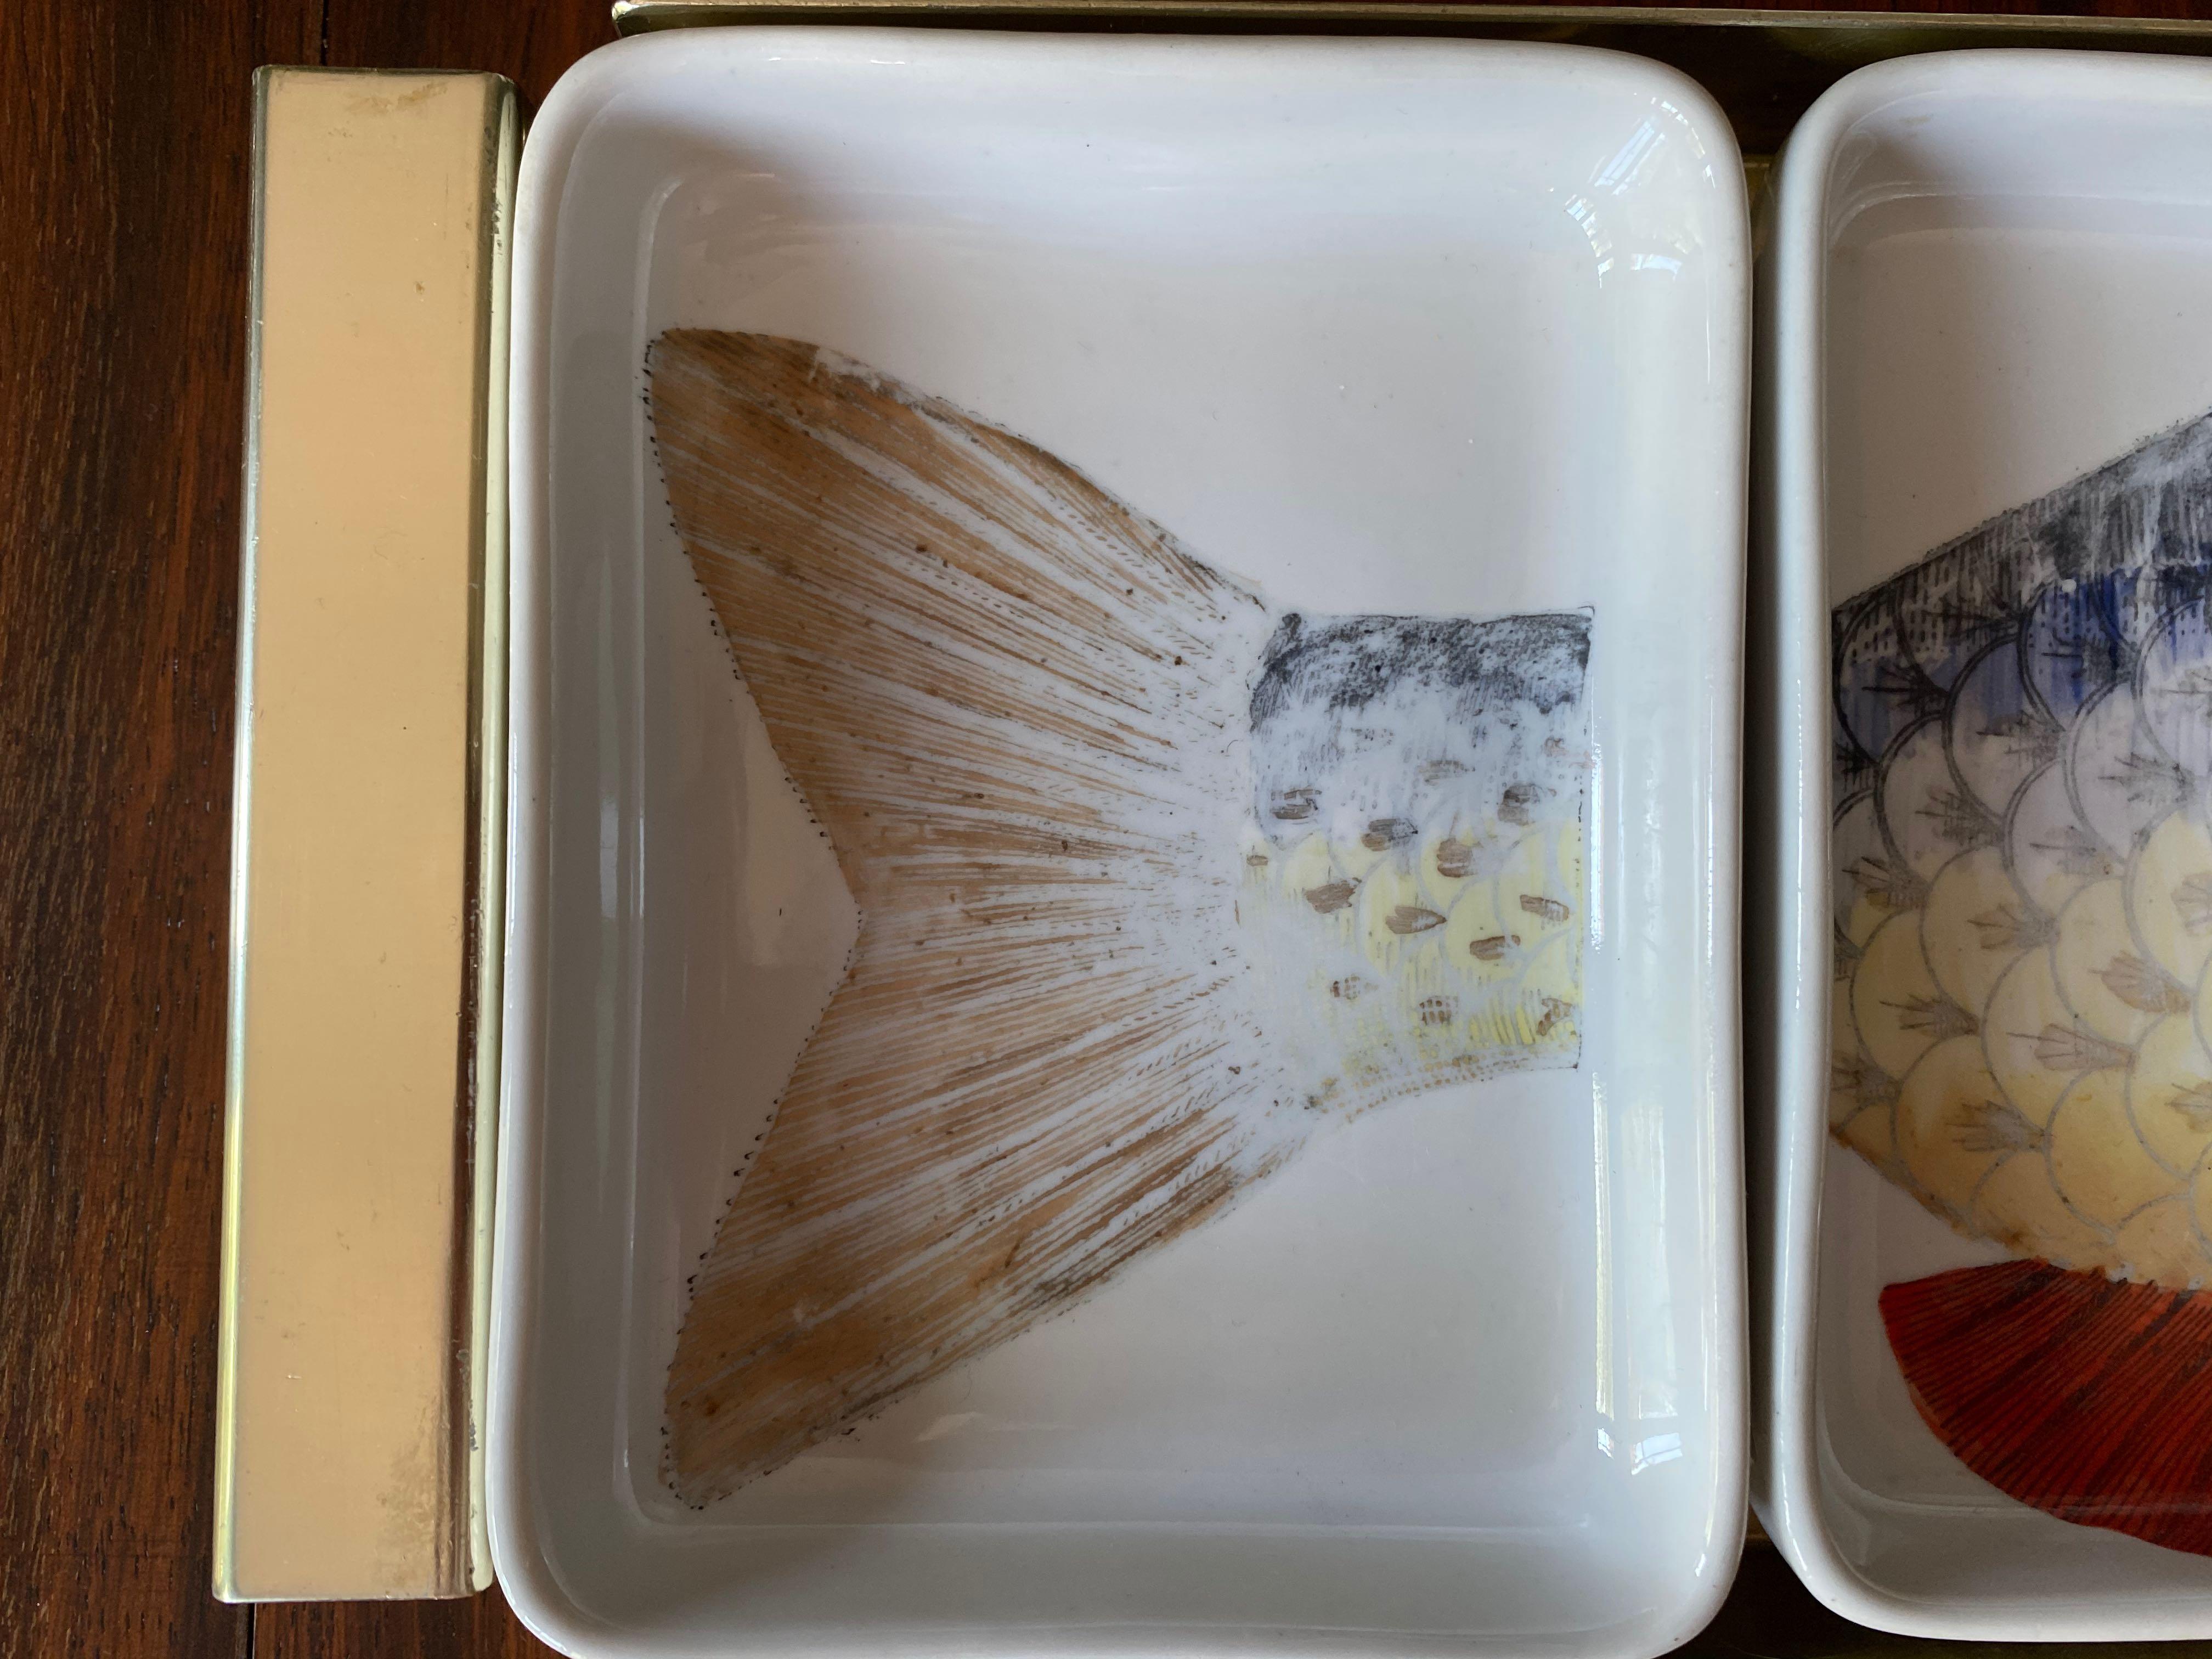 Appetizer tray consisting of four ceramic dishes

Gold metal tray

Printed section of fish on each dish

Fornasetti mark underneath

Slightly faded print

Reference: Fornasetti: The Complete Universe, Edited by Barnaba Fornasetti,